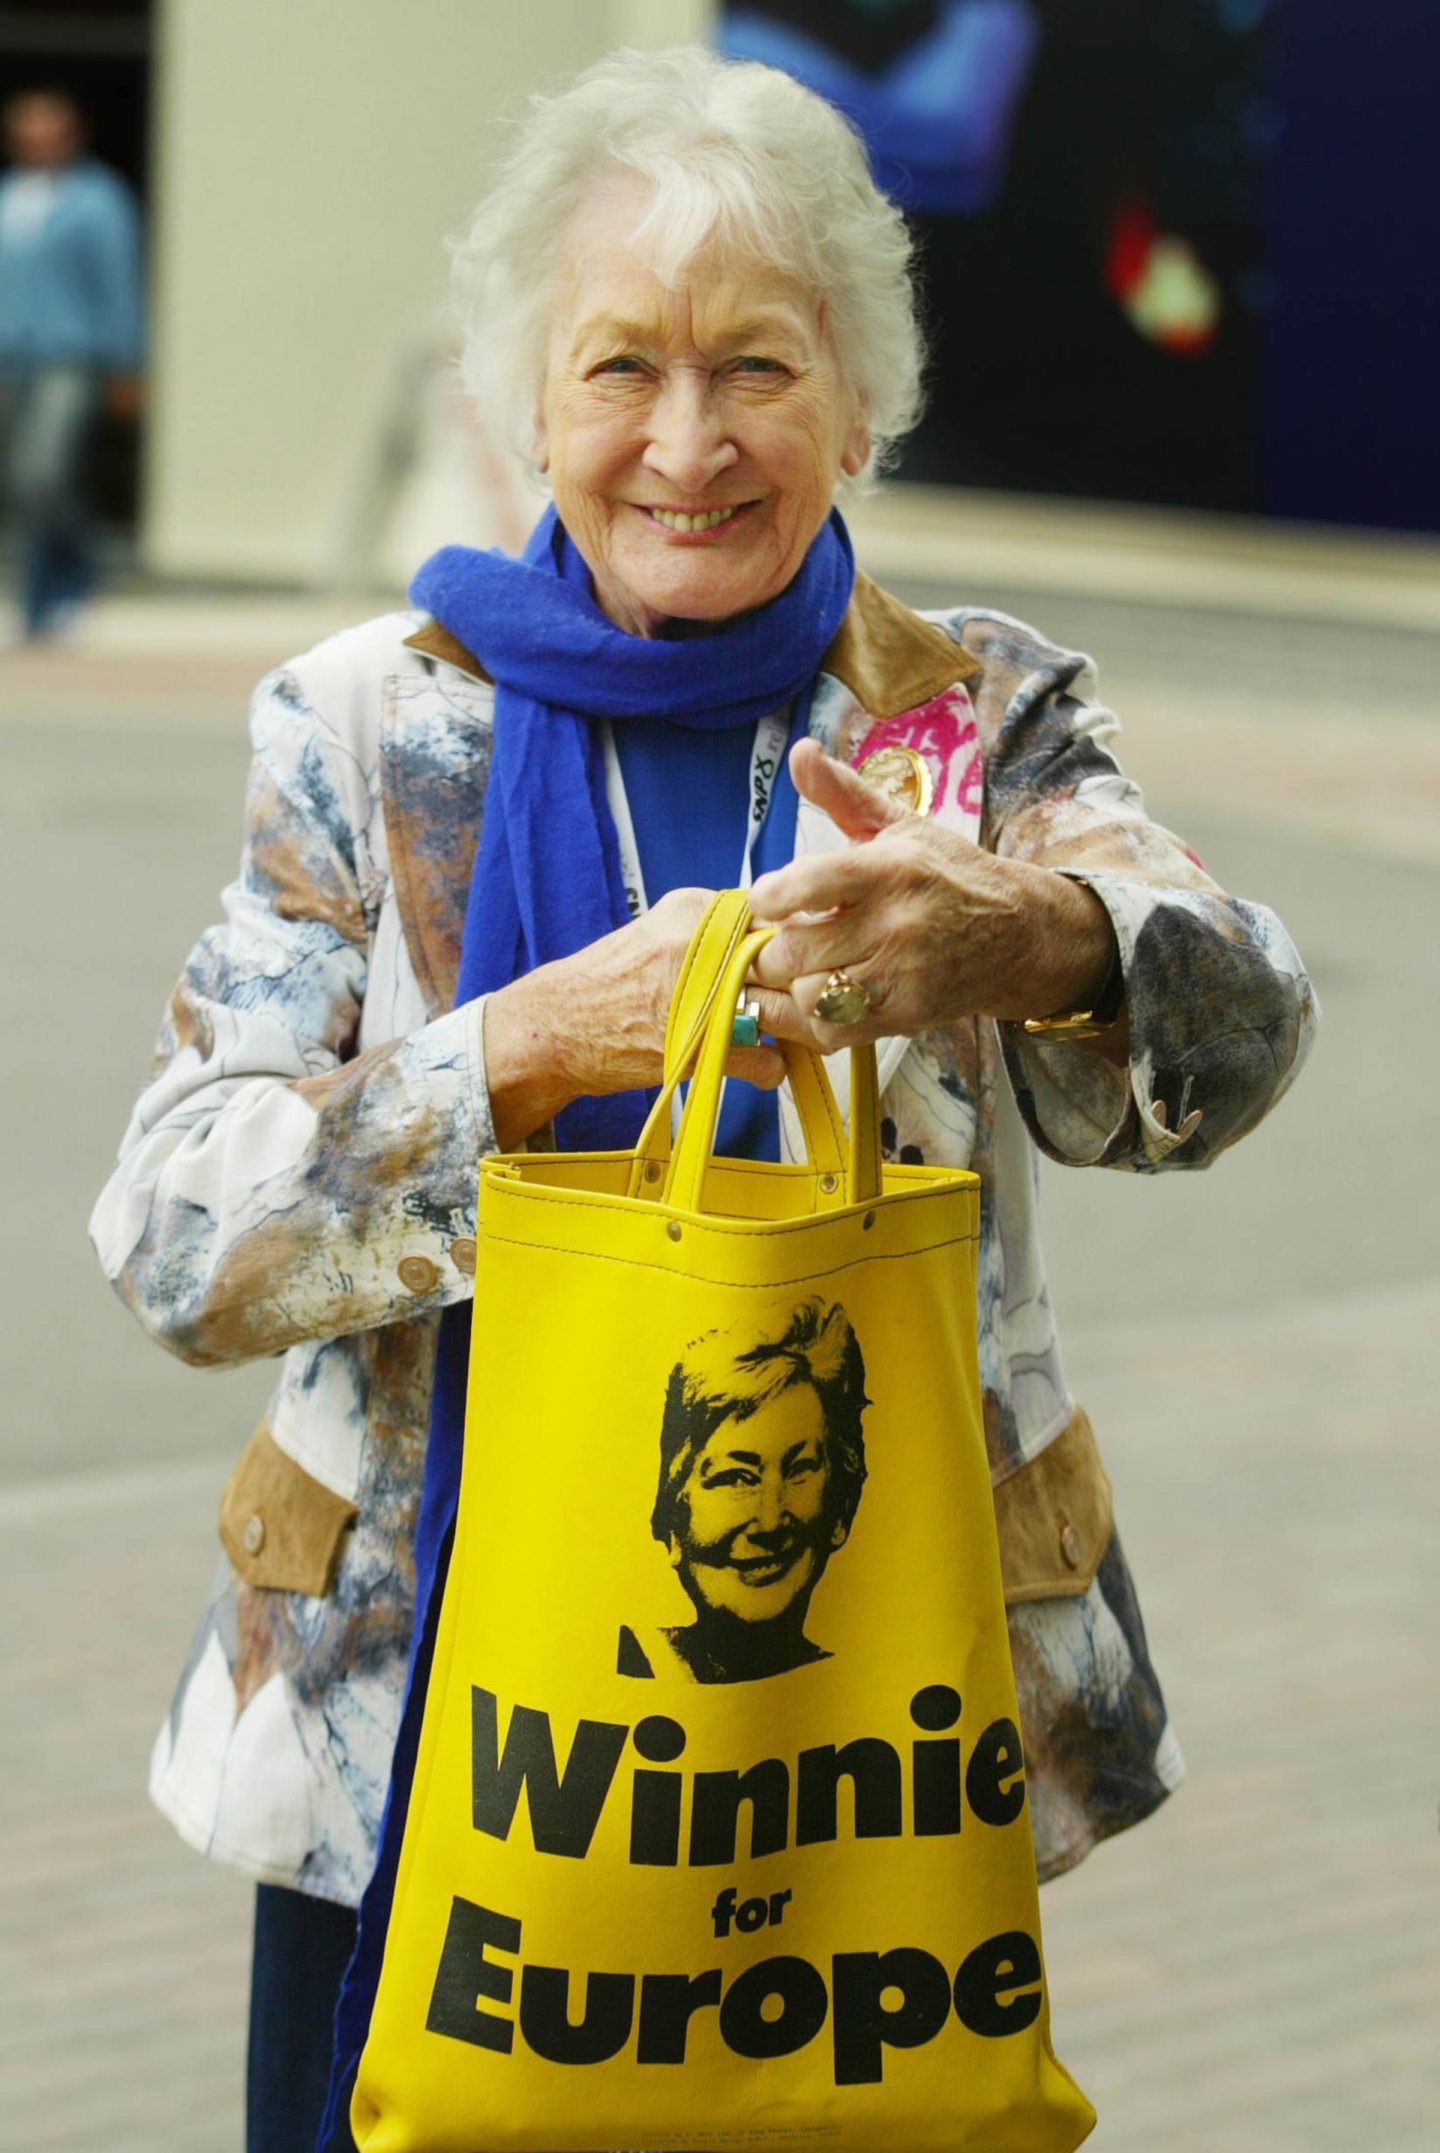 Winnie Ewing holding up a yellow "winnie for europe" tote bag